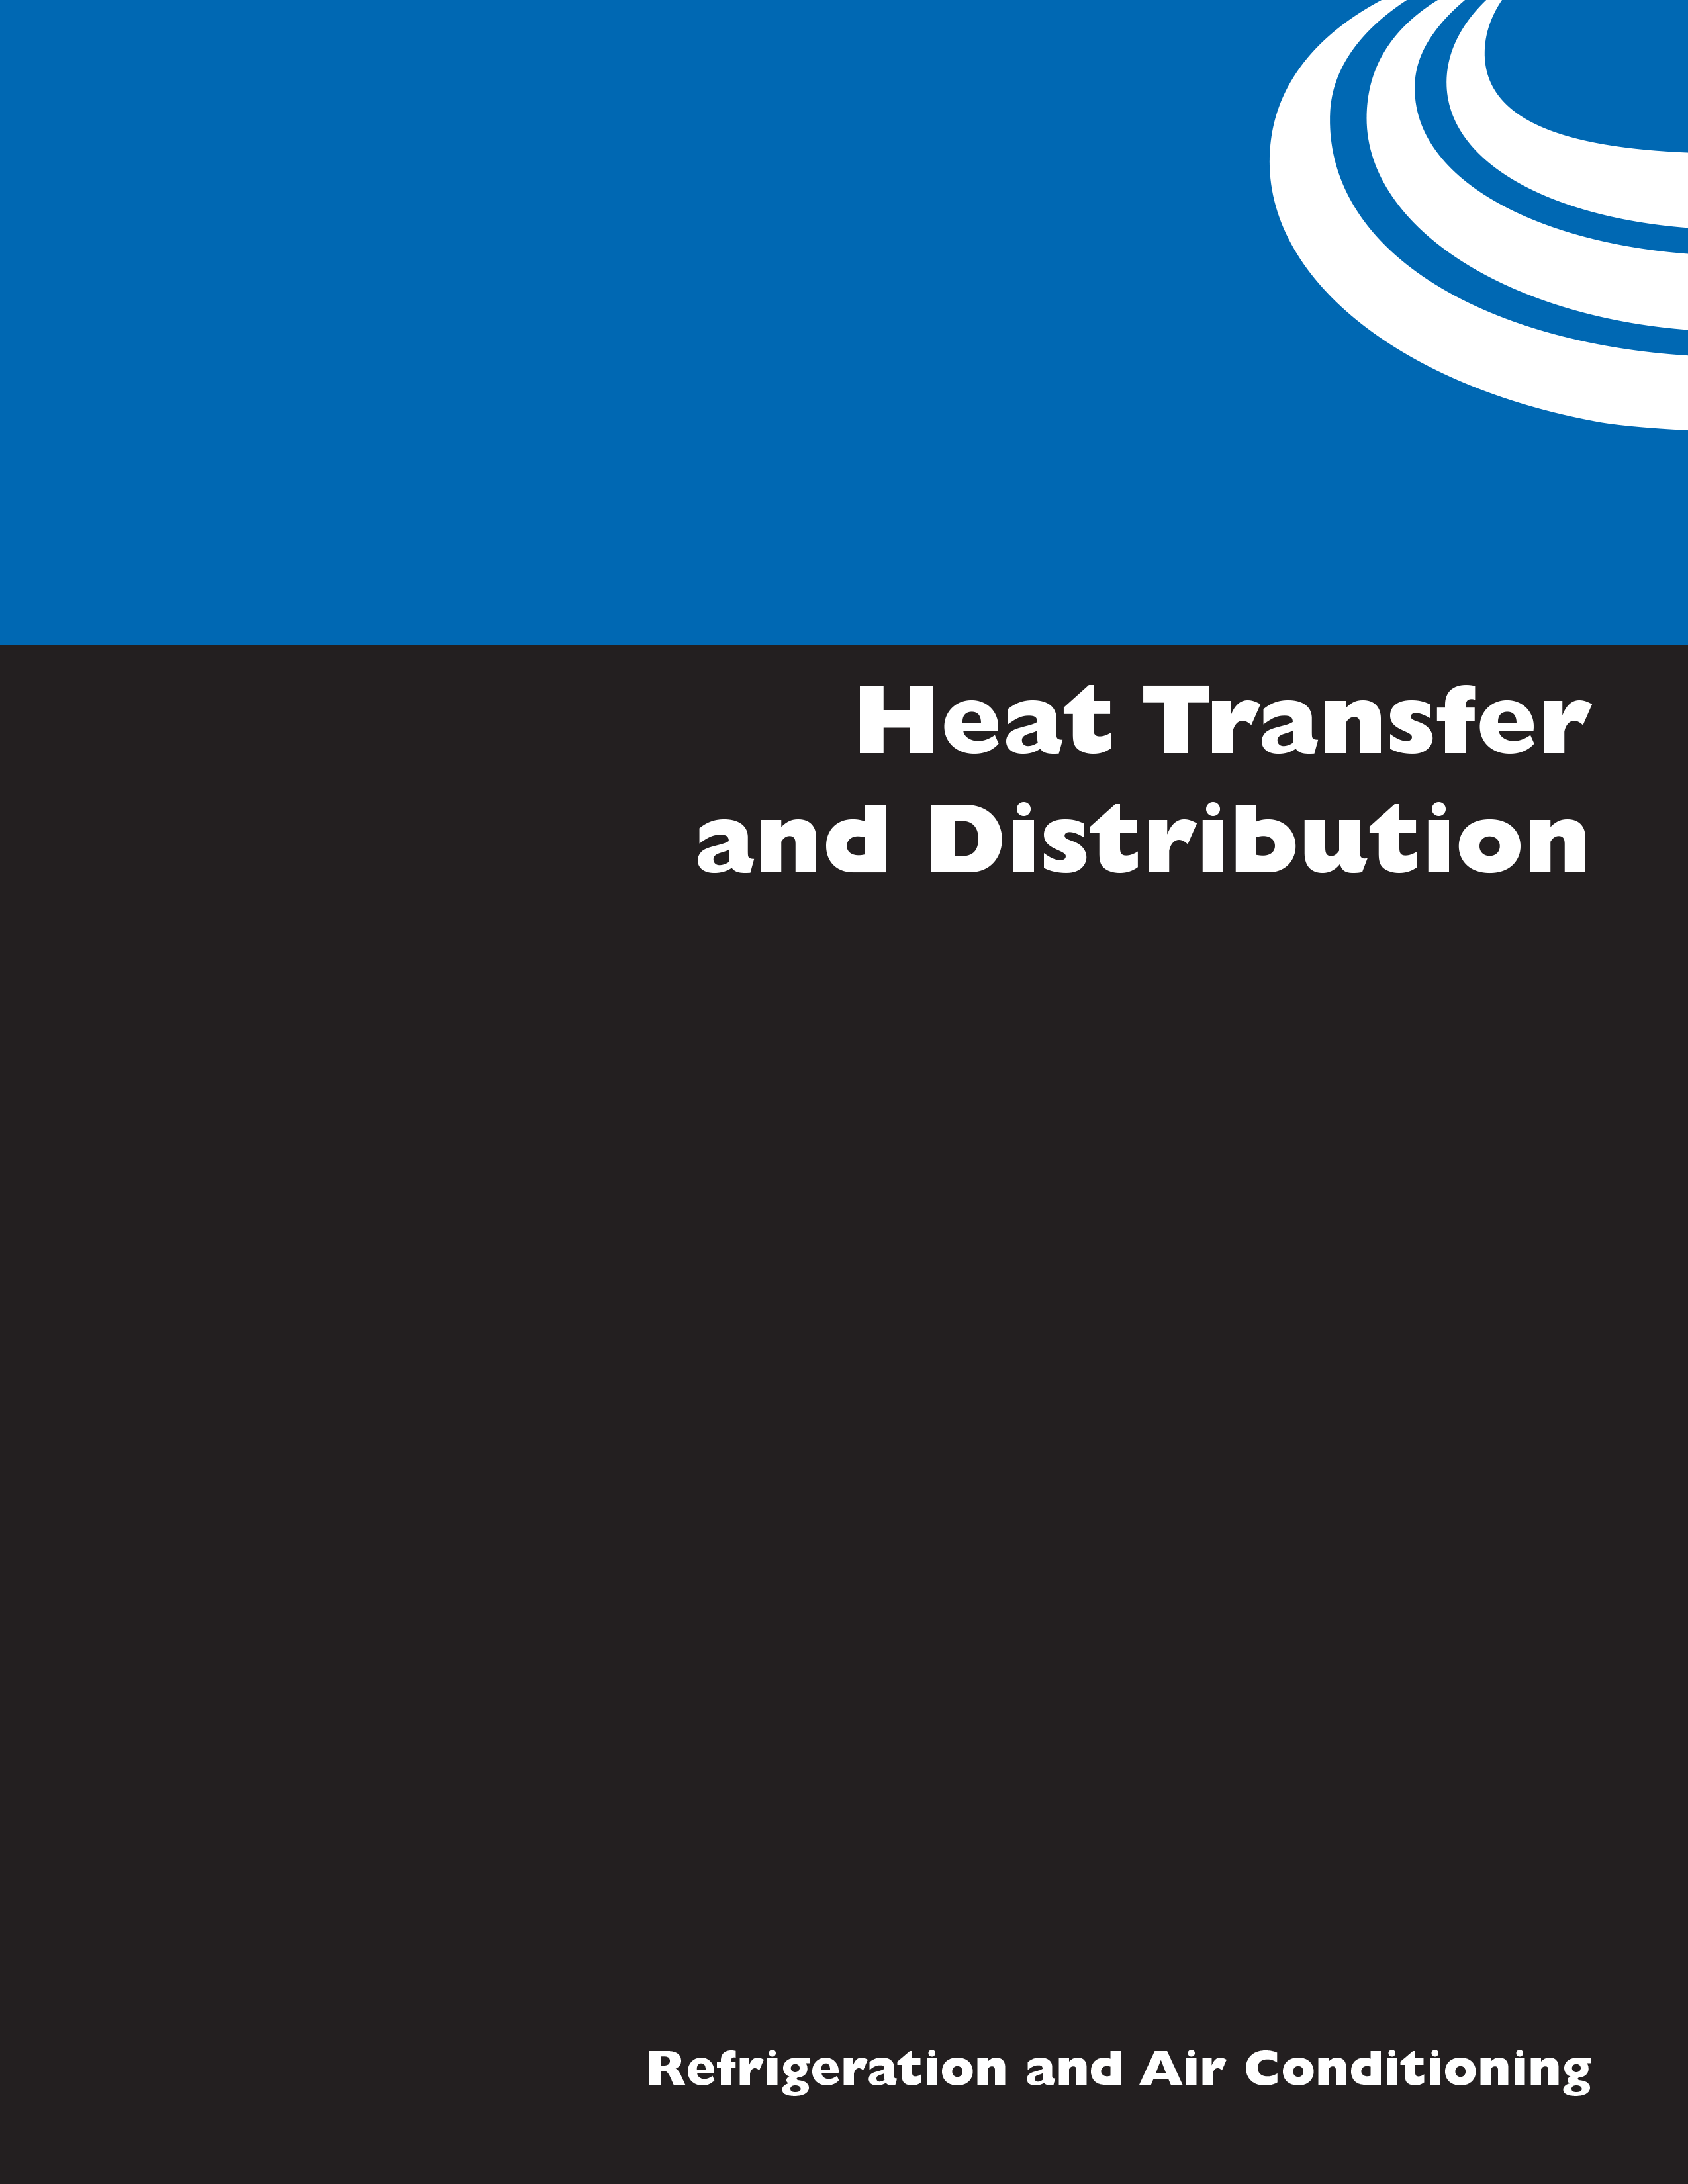 Heat Transfer and Distribution Instructor Edition